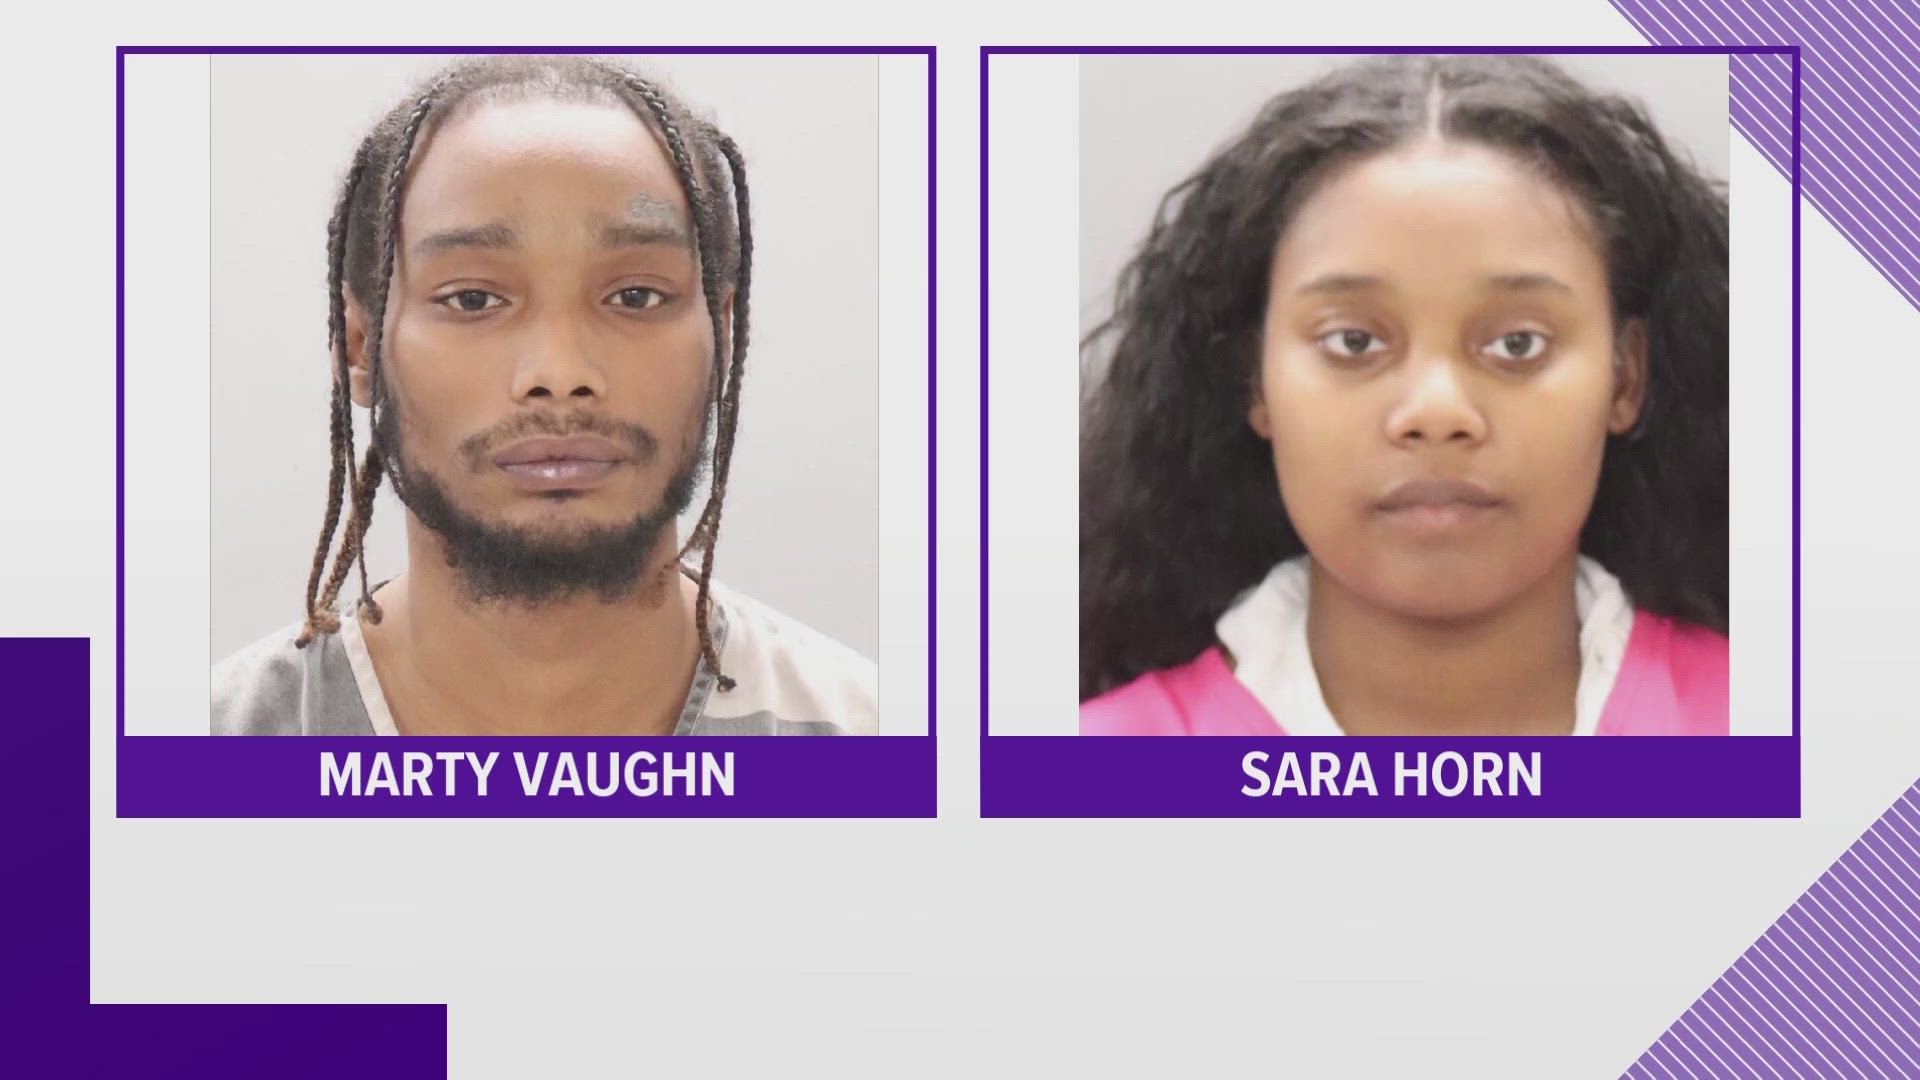 Marty Vaughn and Sara Renee-Monique Horn were found selling large quantities of fentanyl and other drugs in Knox County, according to authorities.